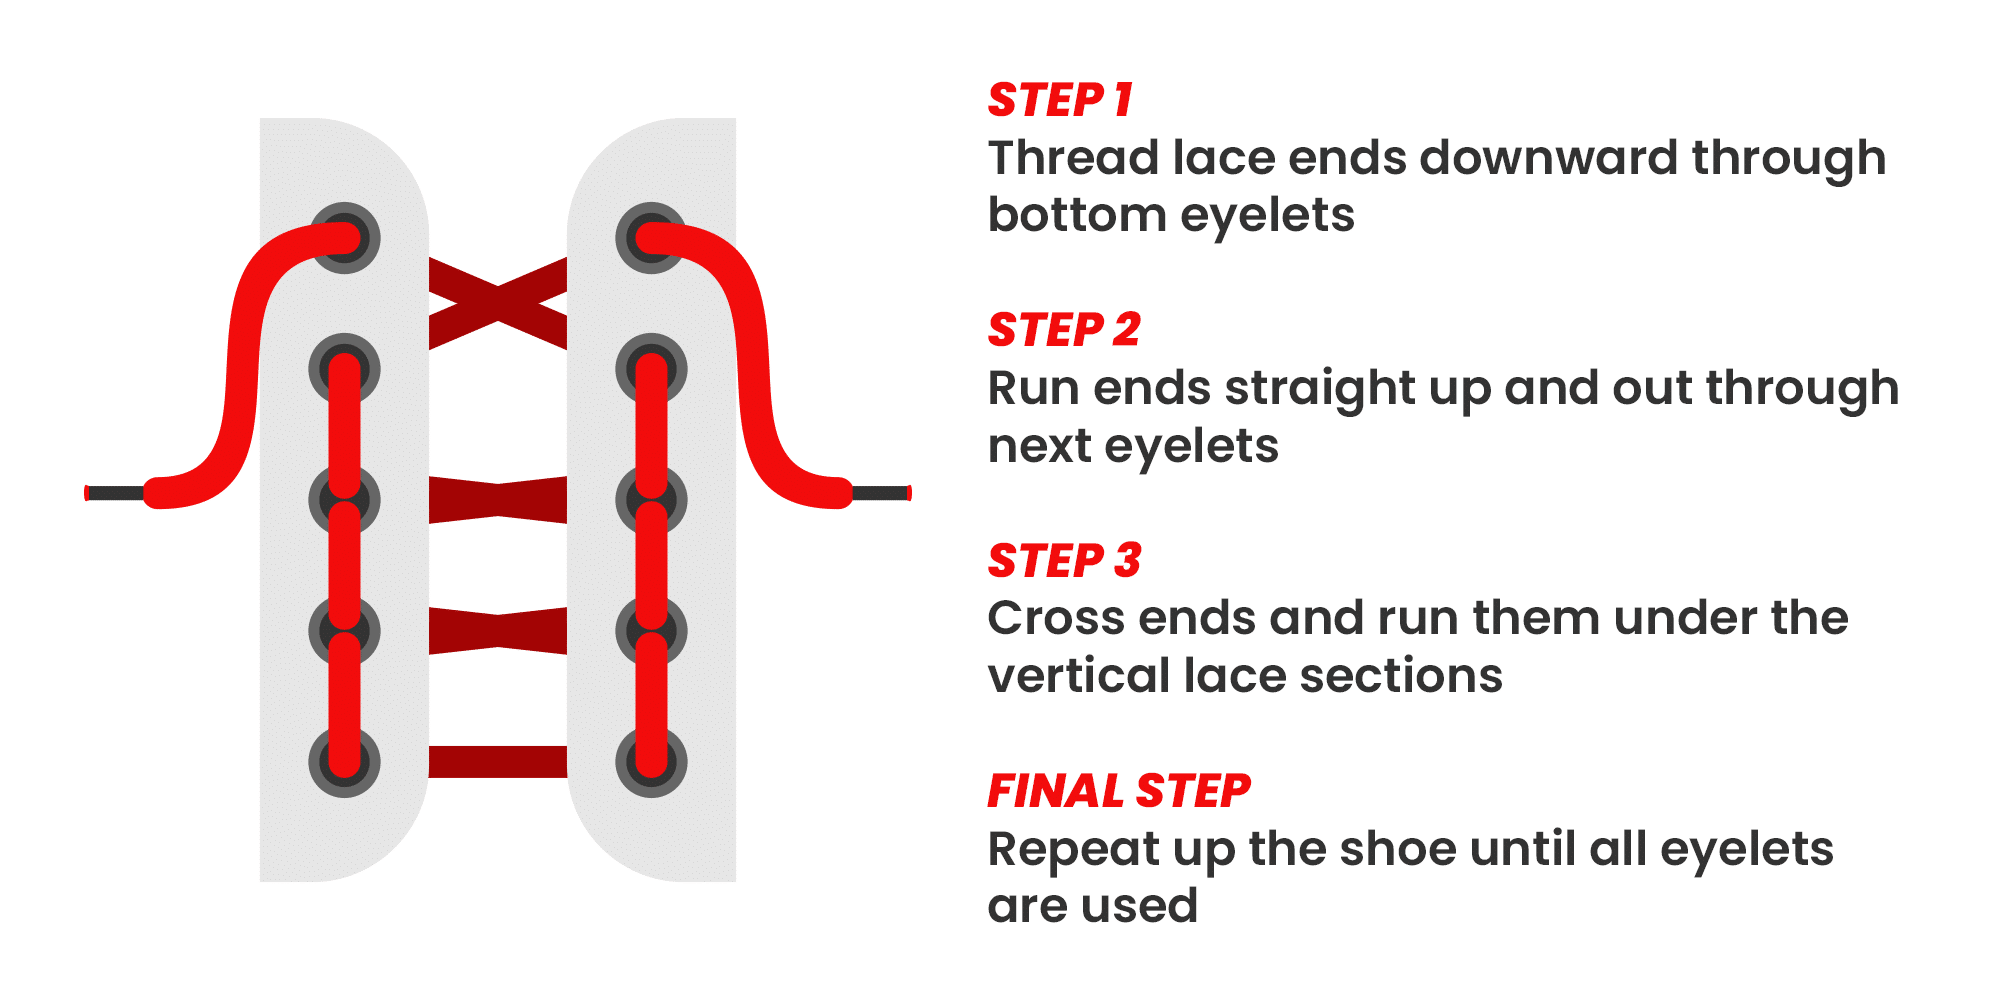 steps to Ladder lace shoes